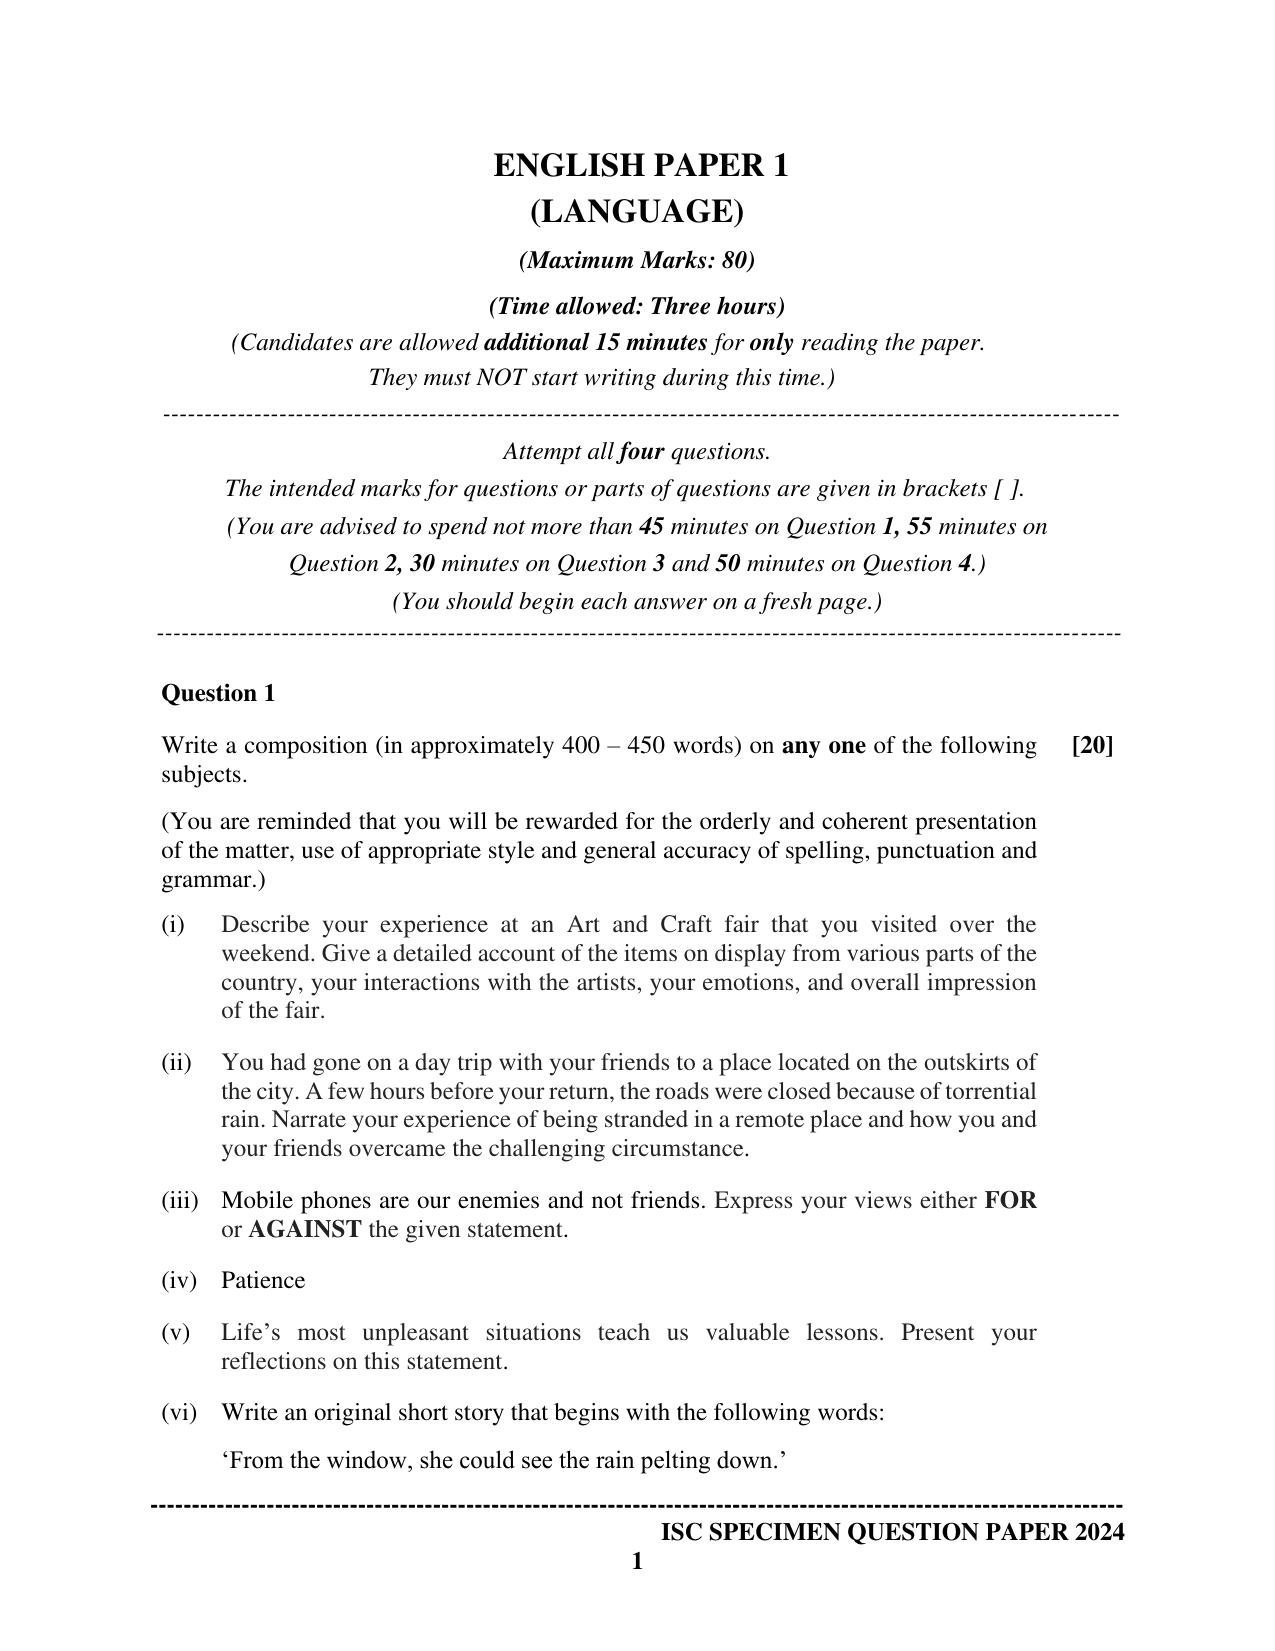 ISC Class 12 2024 English Paper 1 (Language) Sample Paper - Page 1